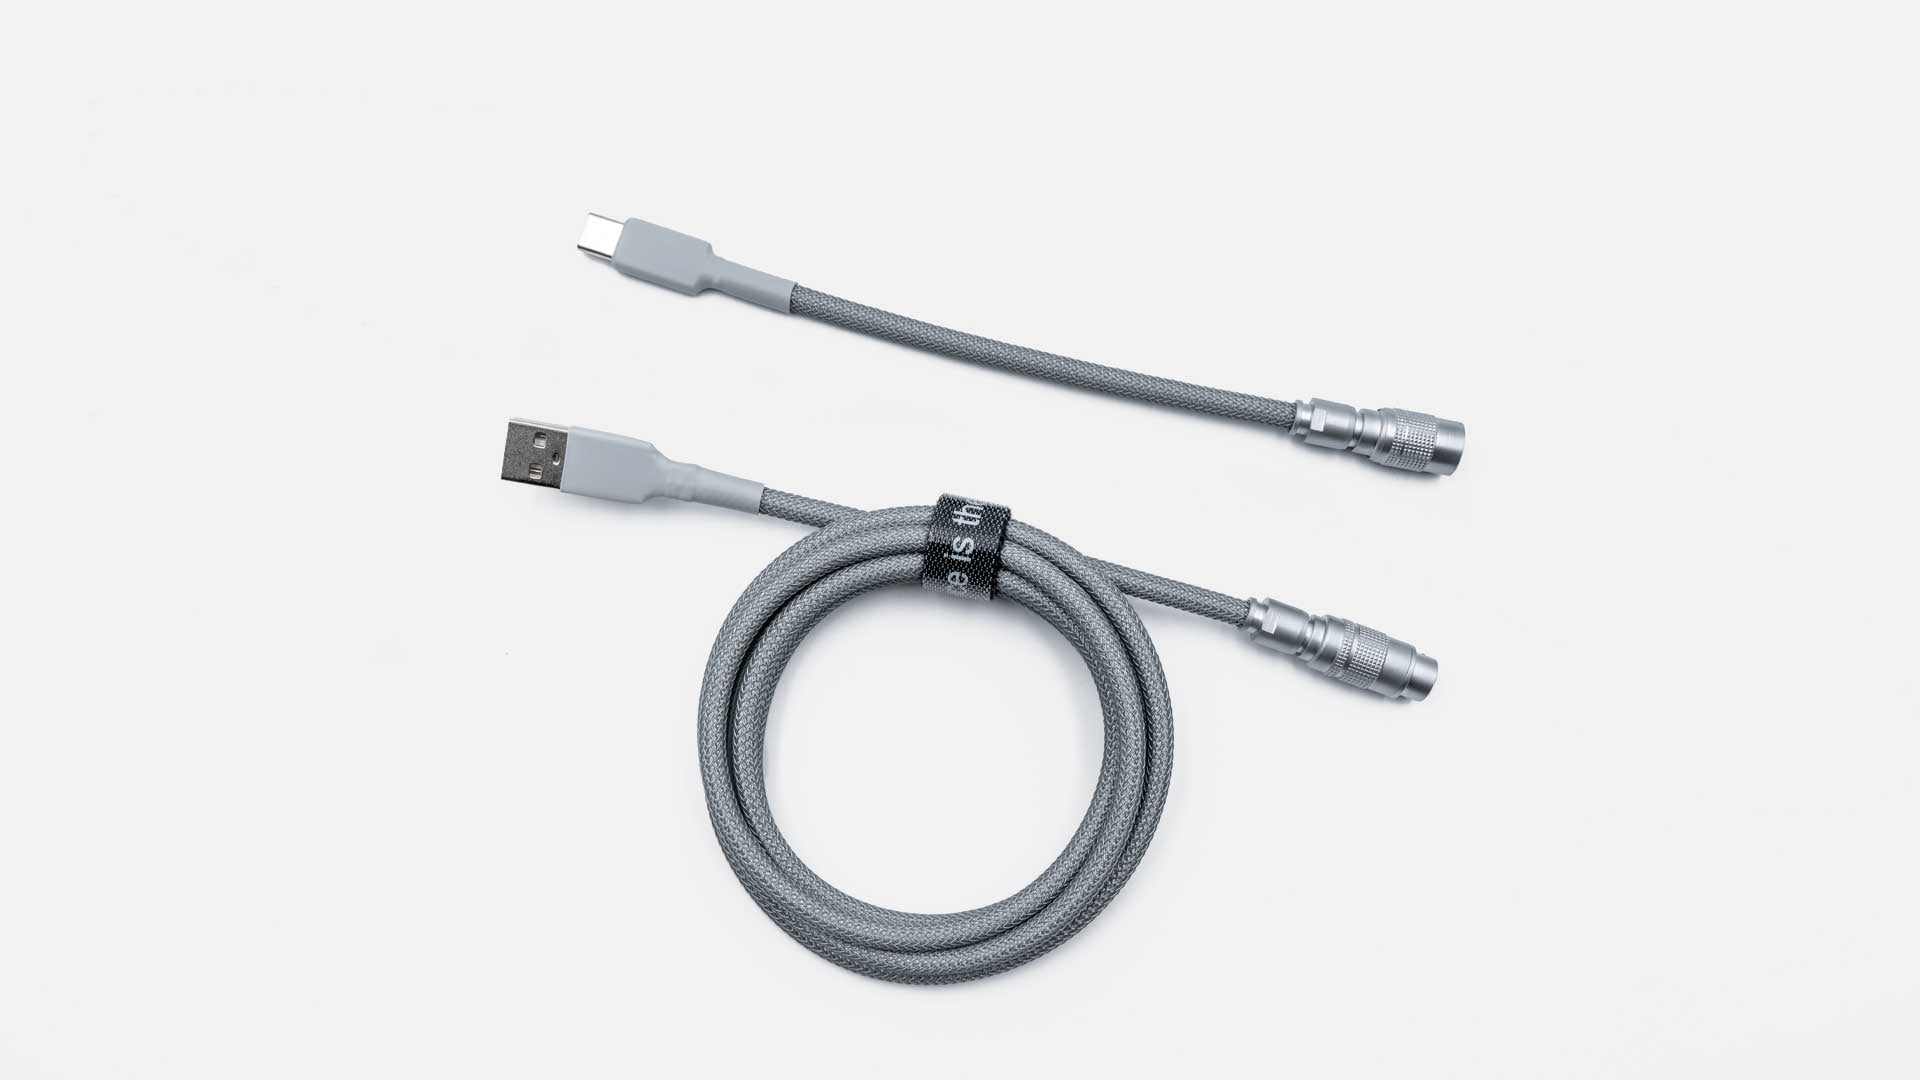 GRAY YC8 CABLE-Space Cables-coiled keyboard cable-coiled usb c cable-coiled cable keyboard